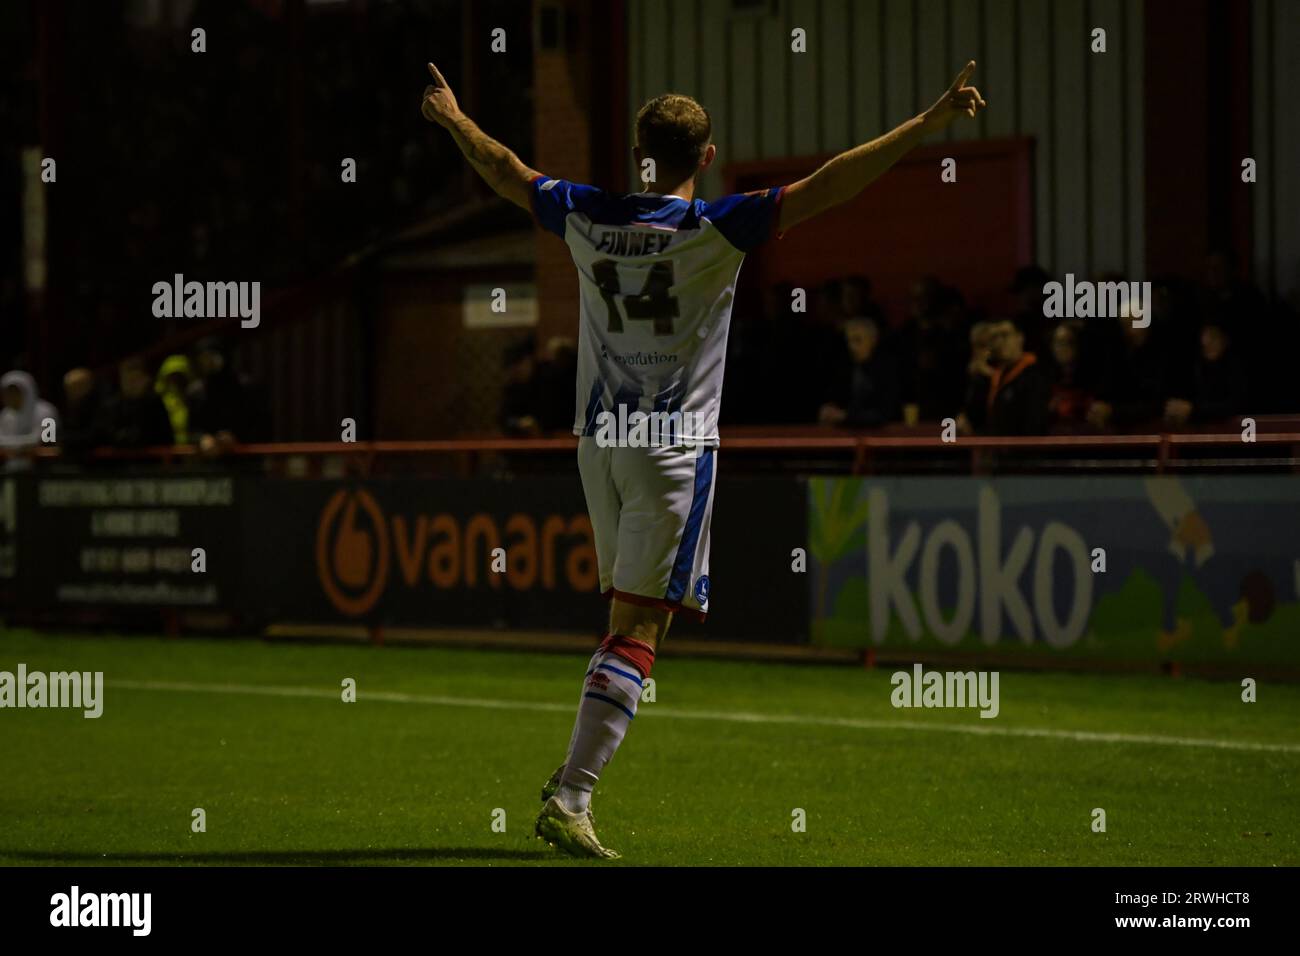 Hartlepool United's Ollie Finney during the Vanarama National League match  between Altrincham and Hartlepool United at